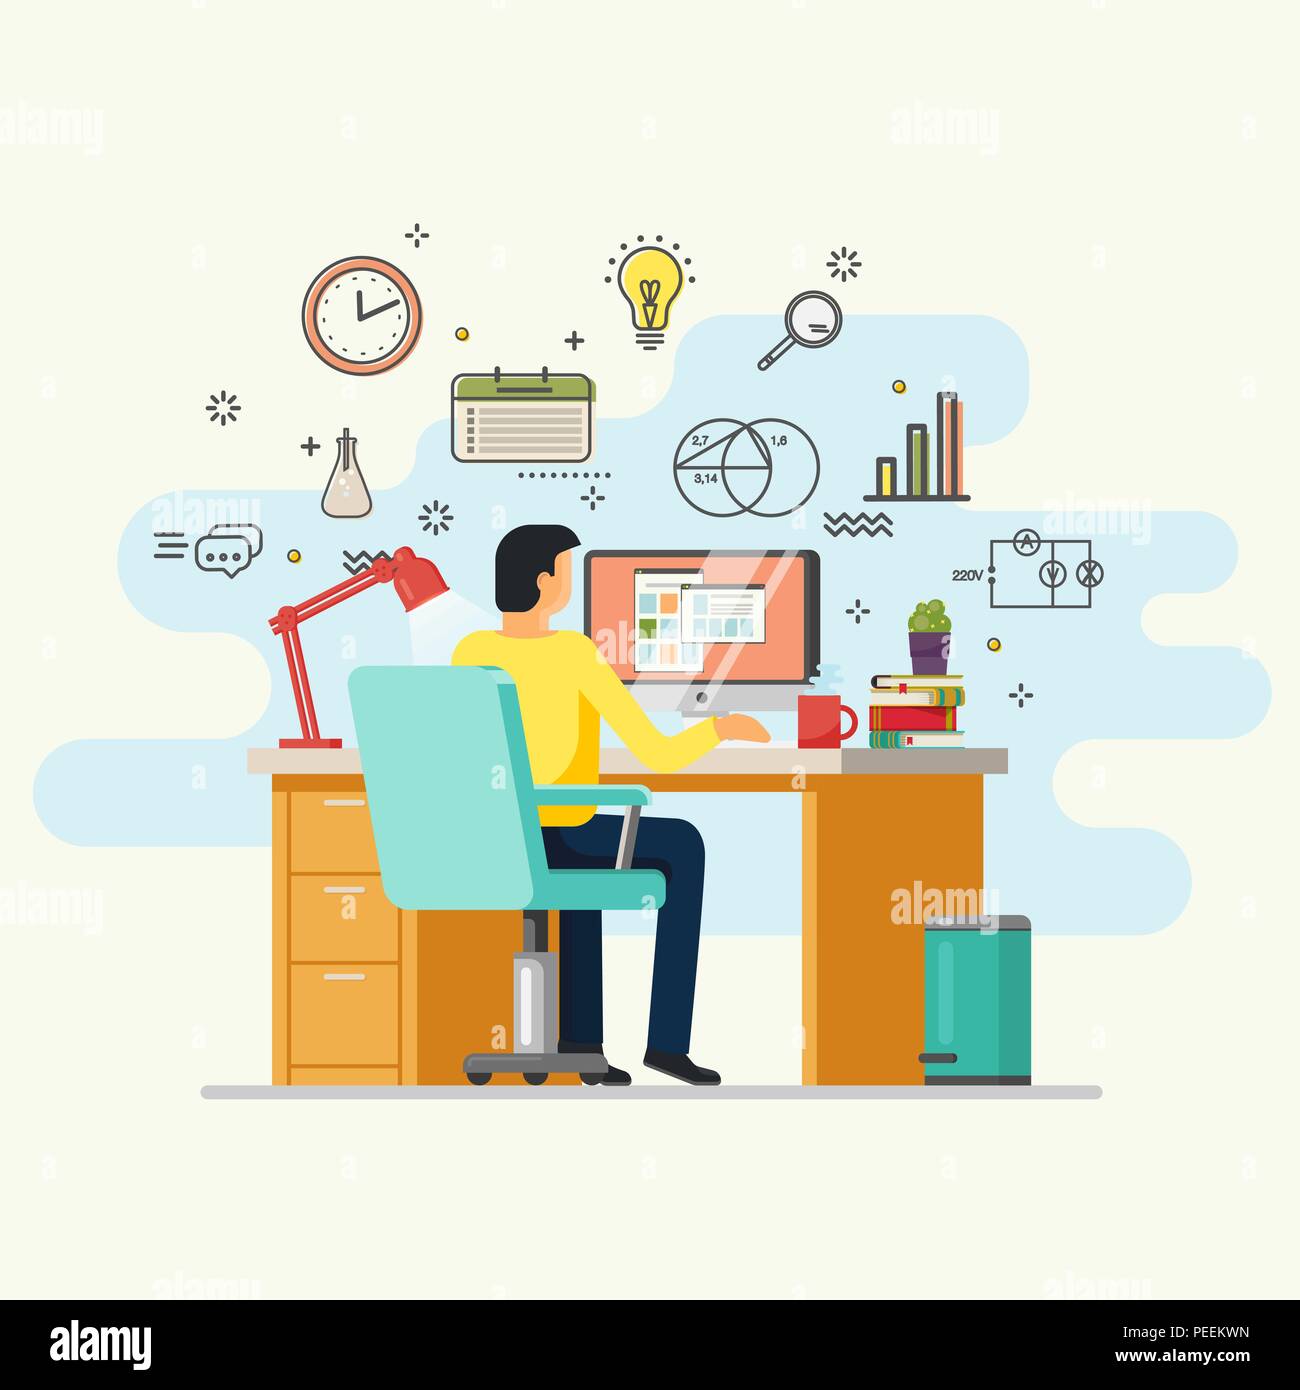 Man working at computer. Male doing job at table with computer. Guy sitting in armchair at desk with lamp and books, magnifying glass and clock. Employee and worker, workplace, office theme Stock Vector